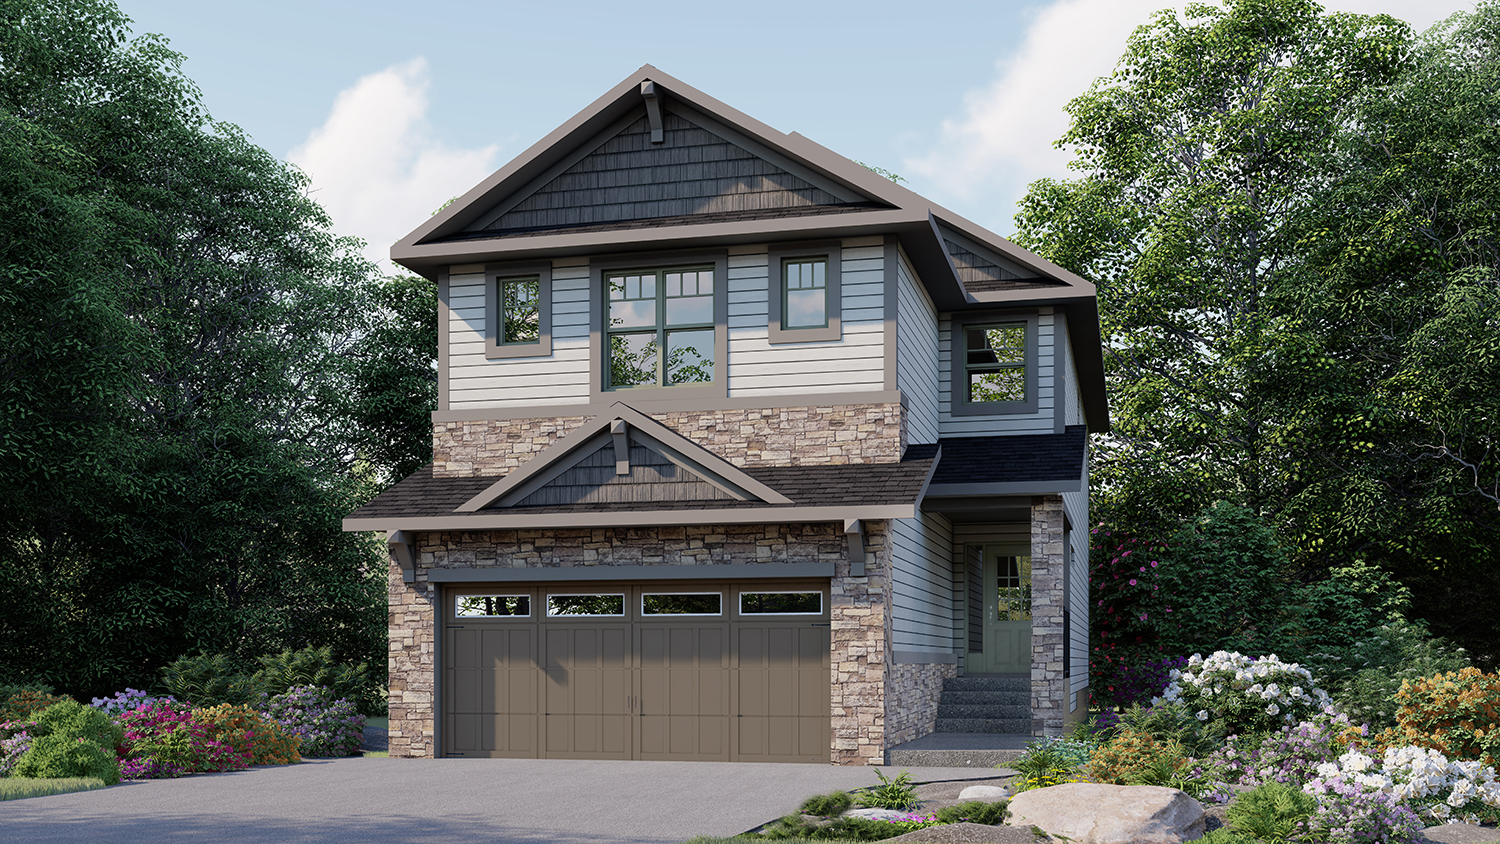 Exterior Rendering - Single Family House - Stonefield